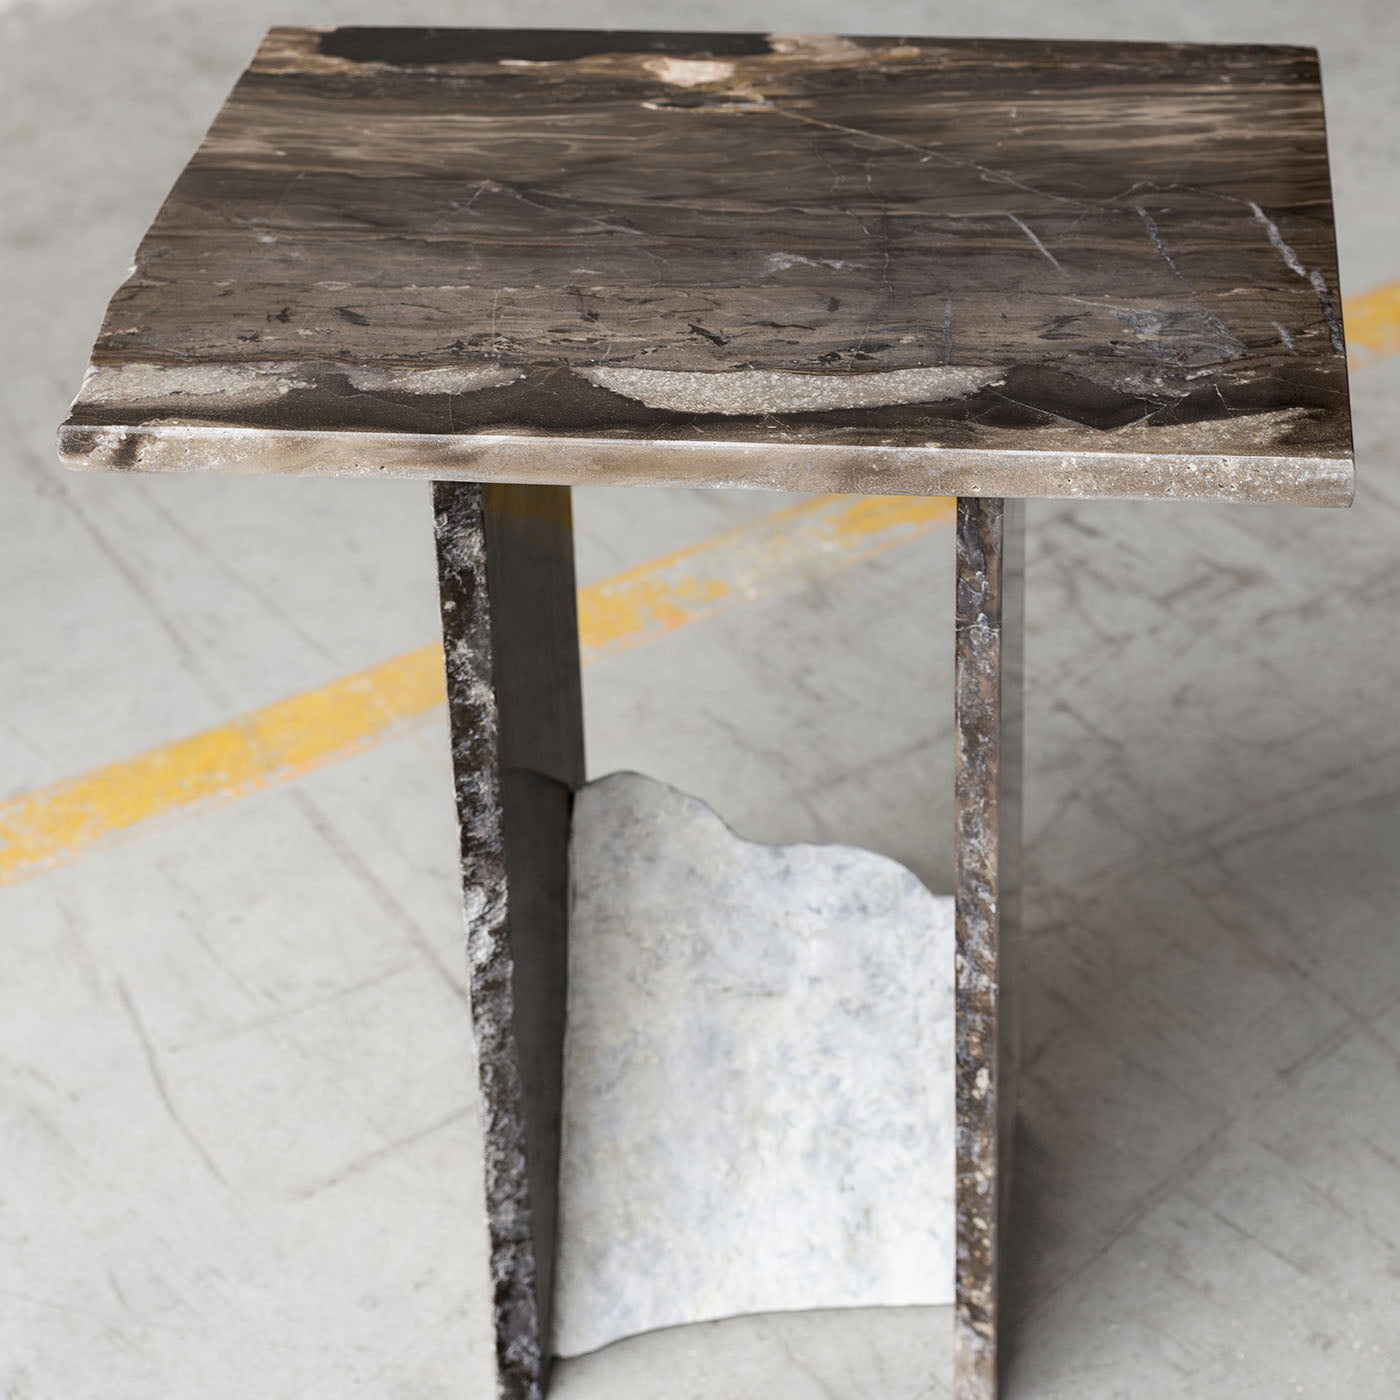 SST013-2 Frappuccino Marble Side Table - Alternative view 2